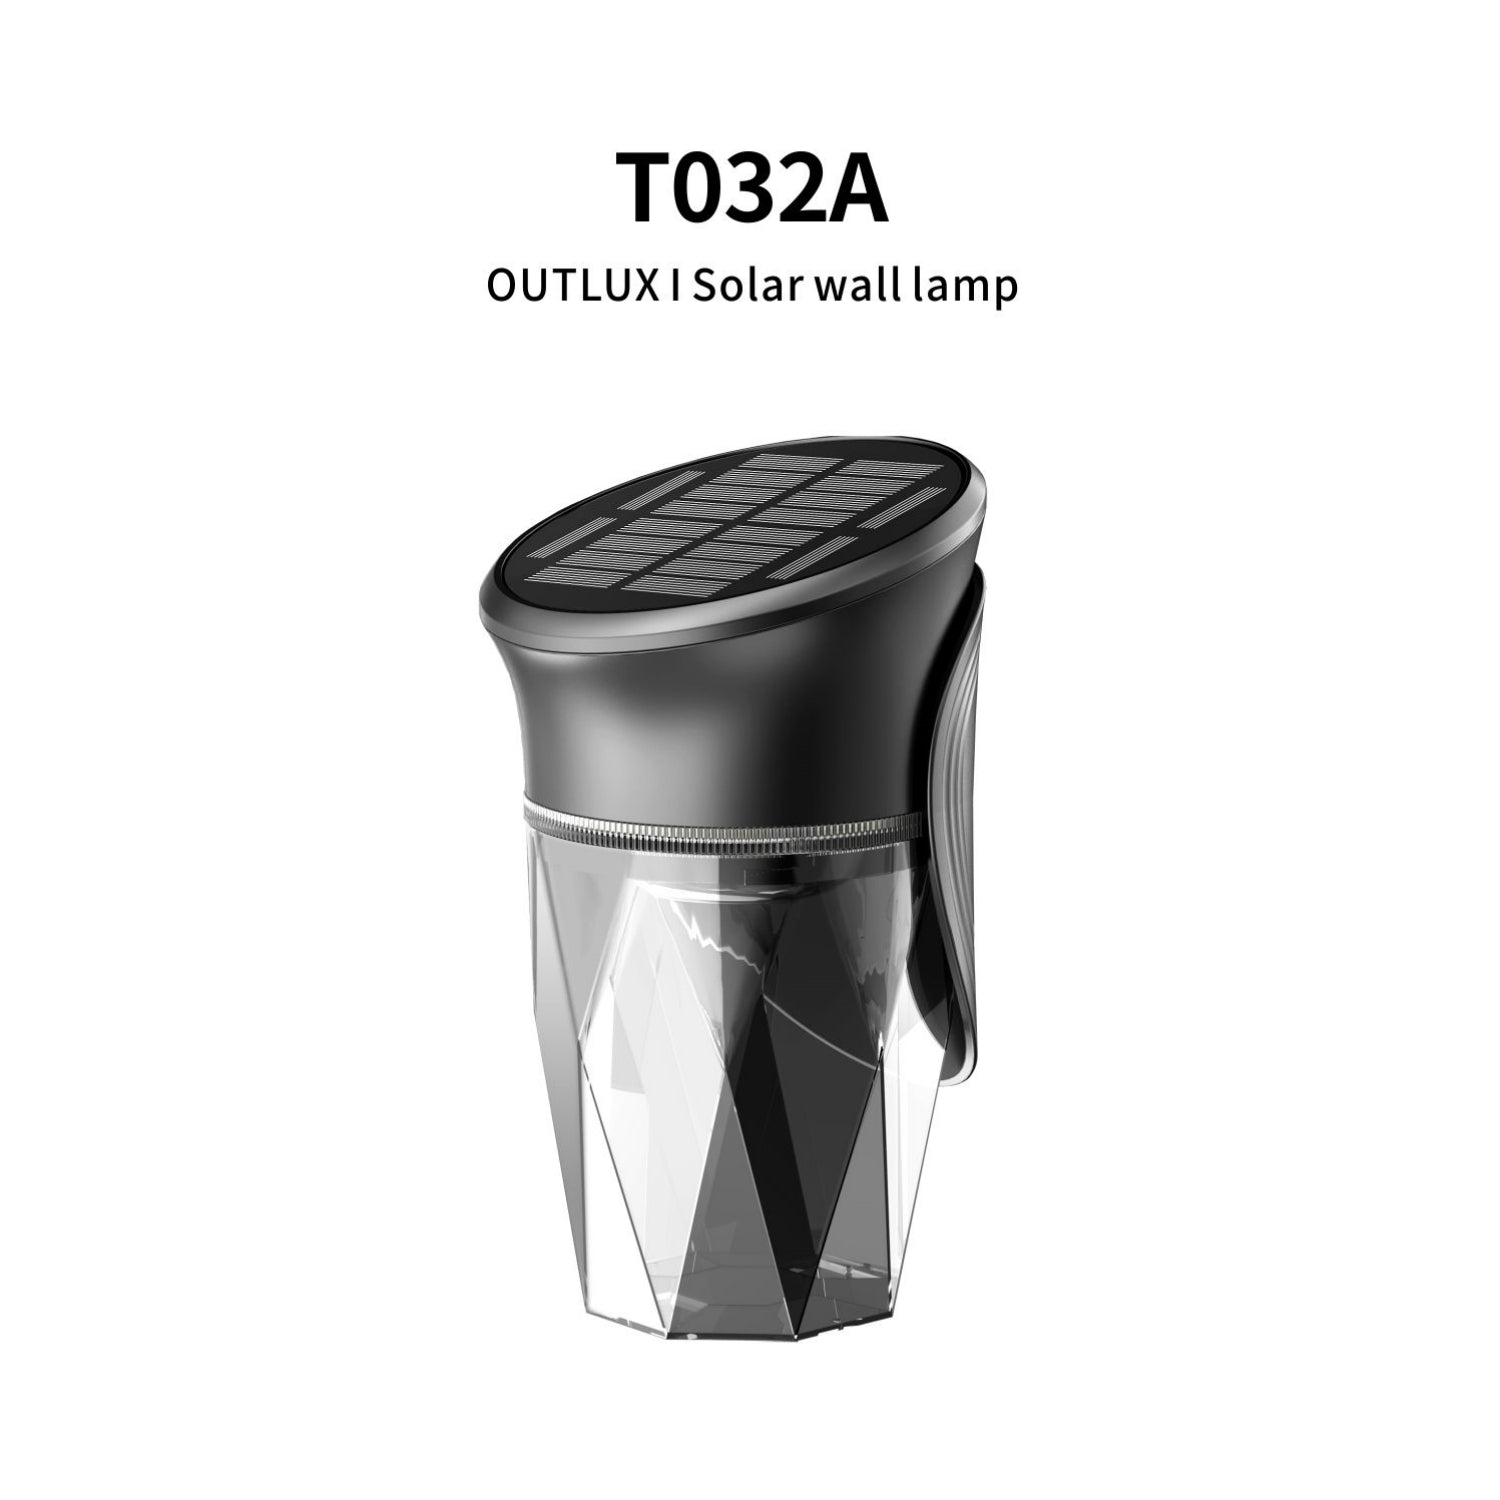 Outlux Solar Wall Lights- T032A